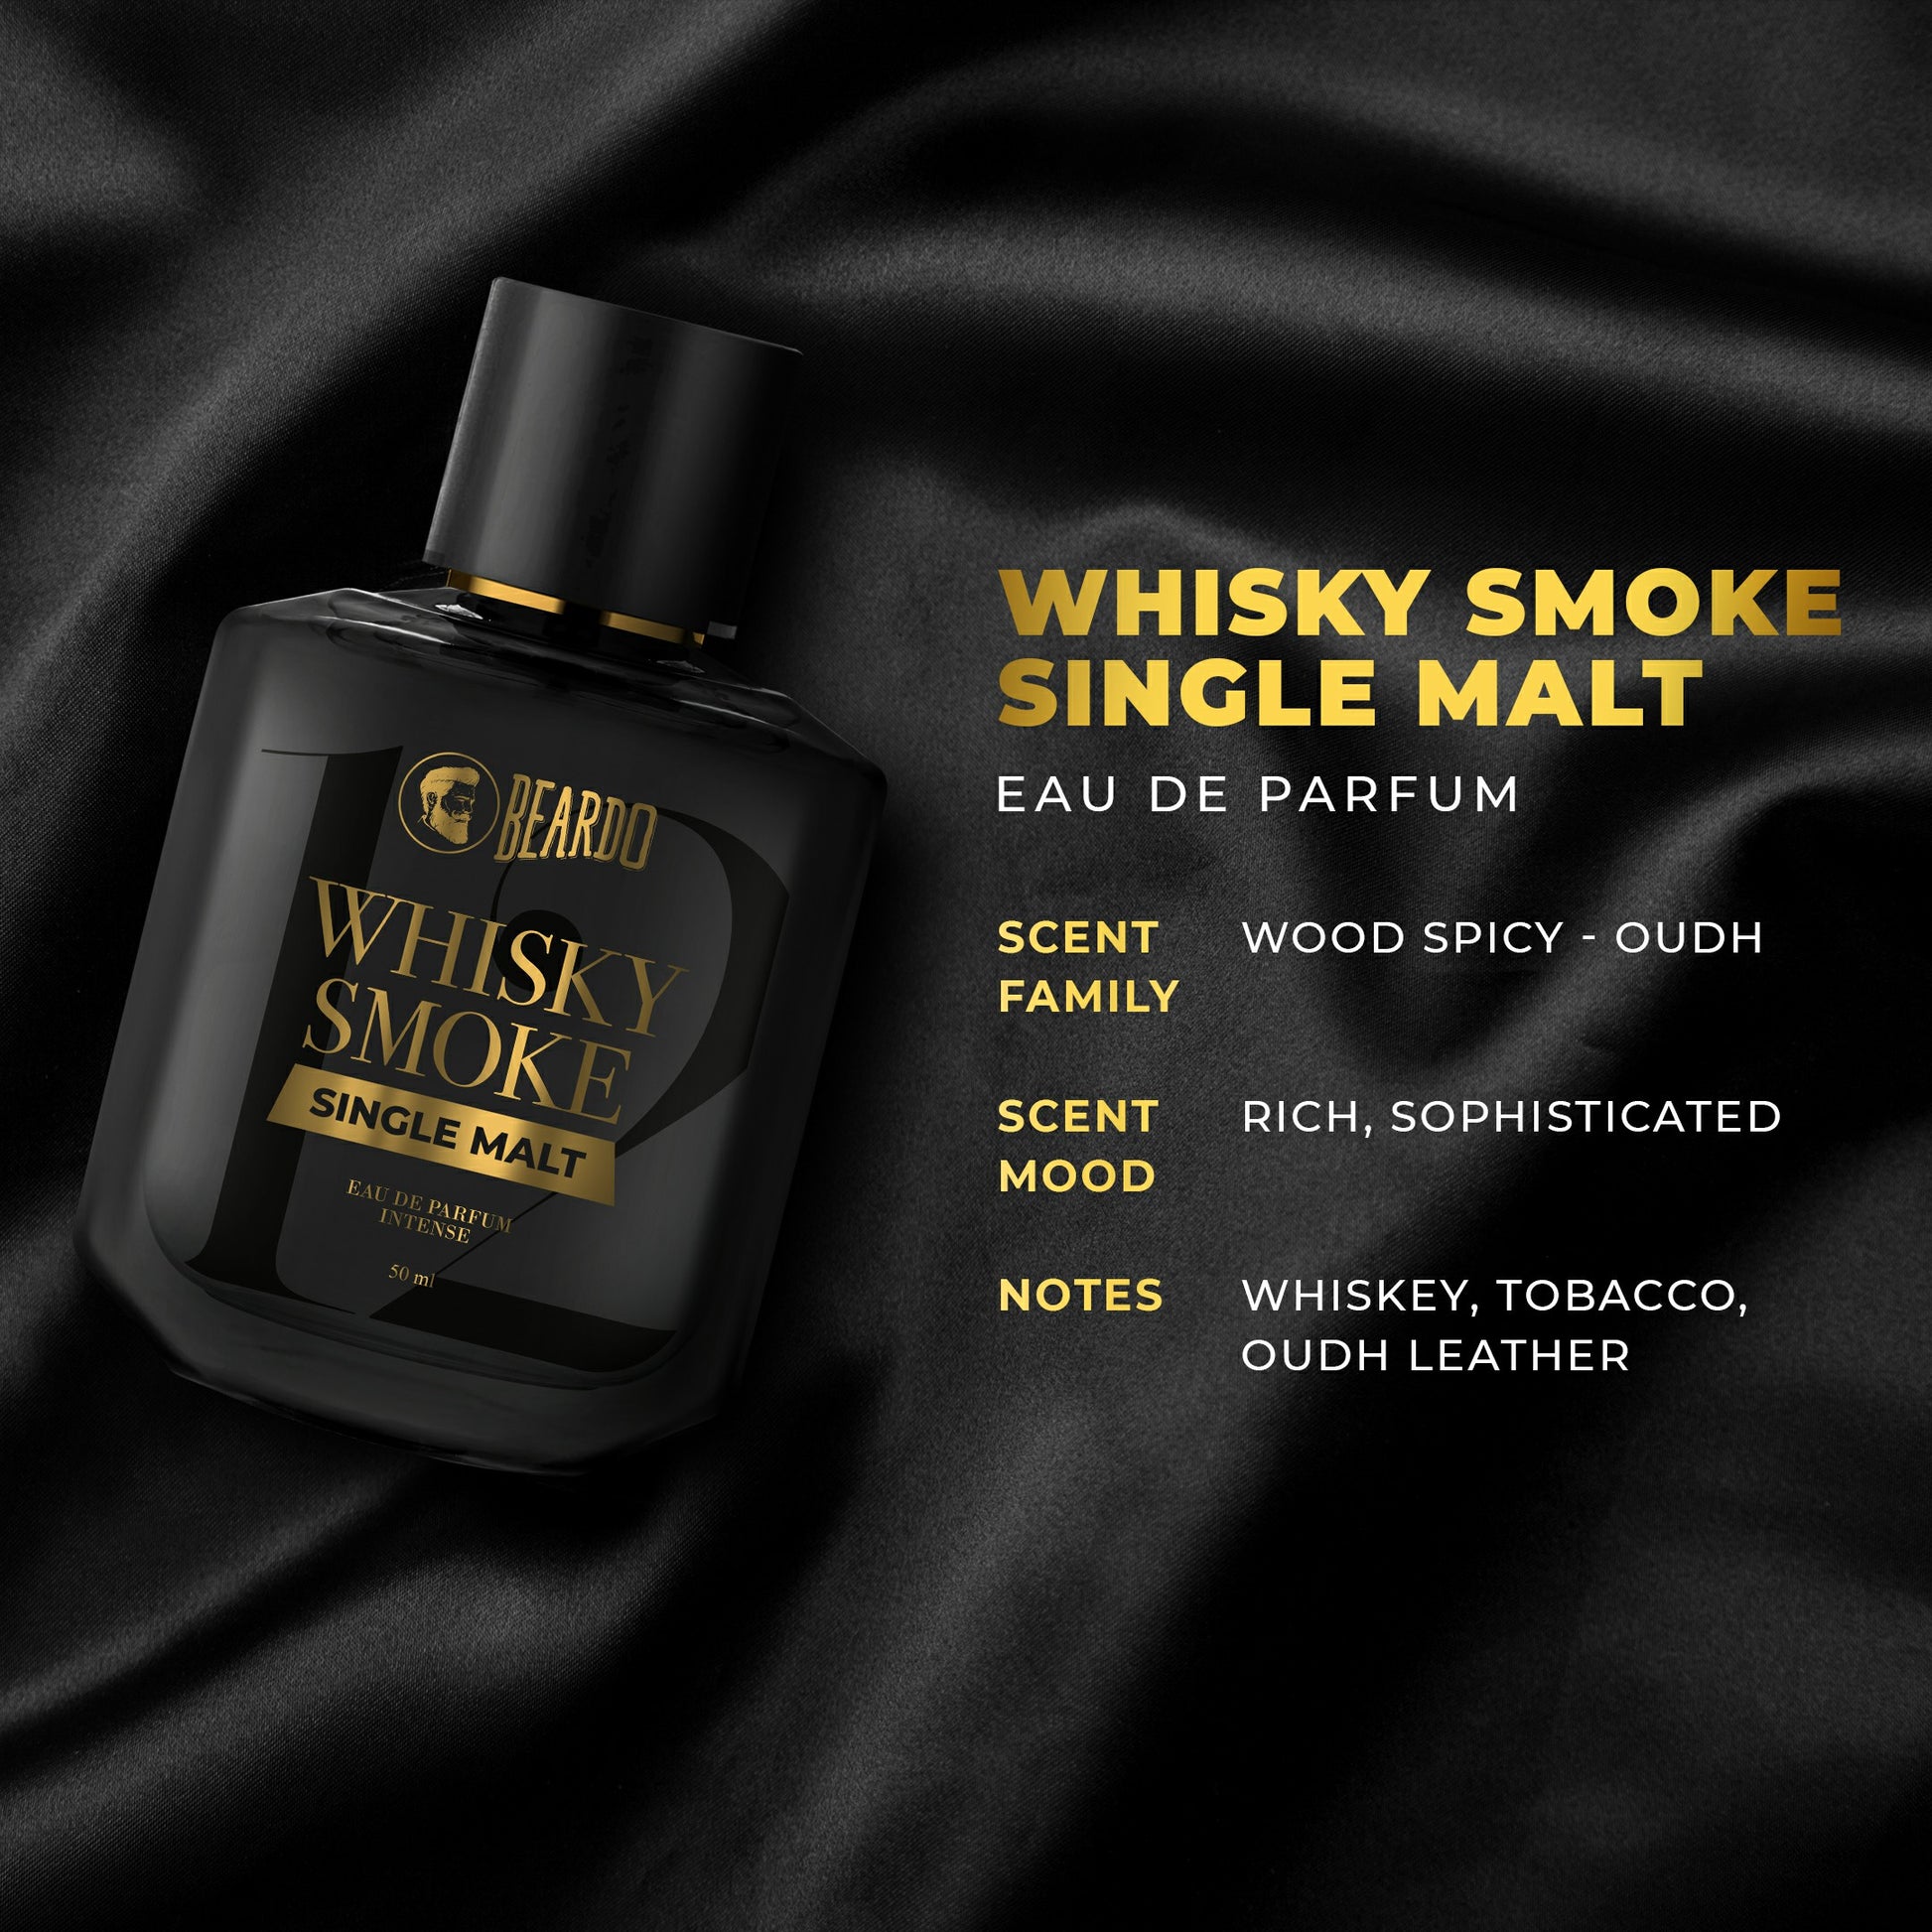 woody, spicy, oudh, tobacco